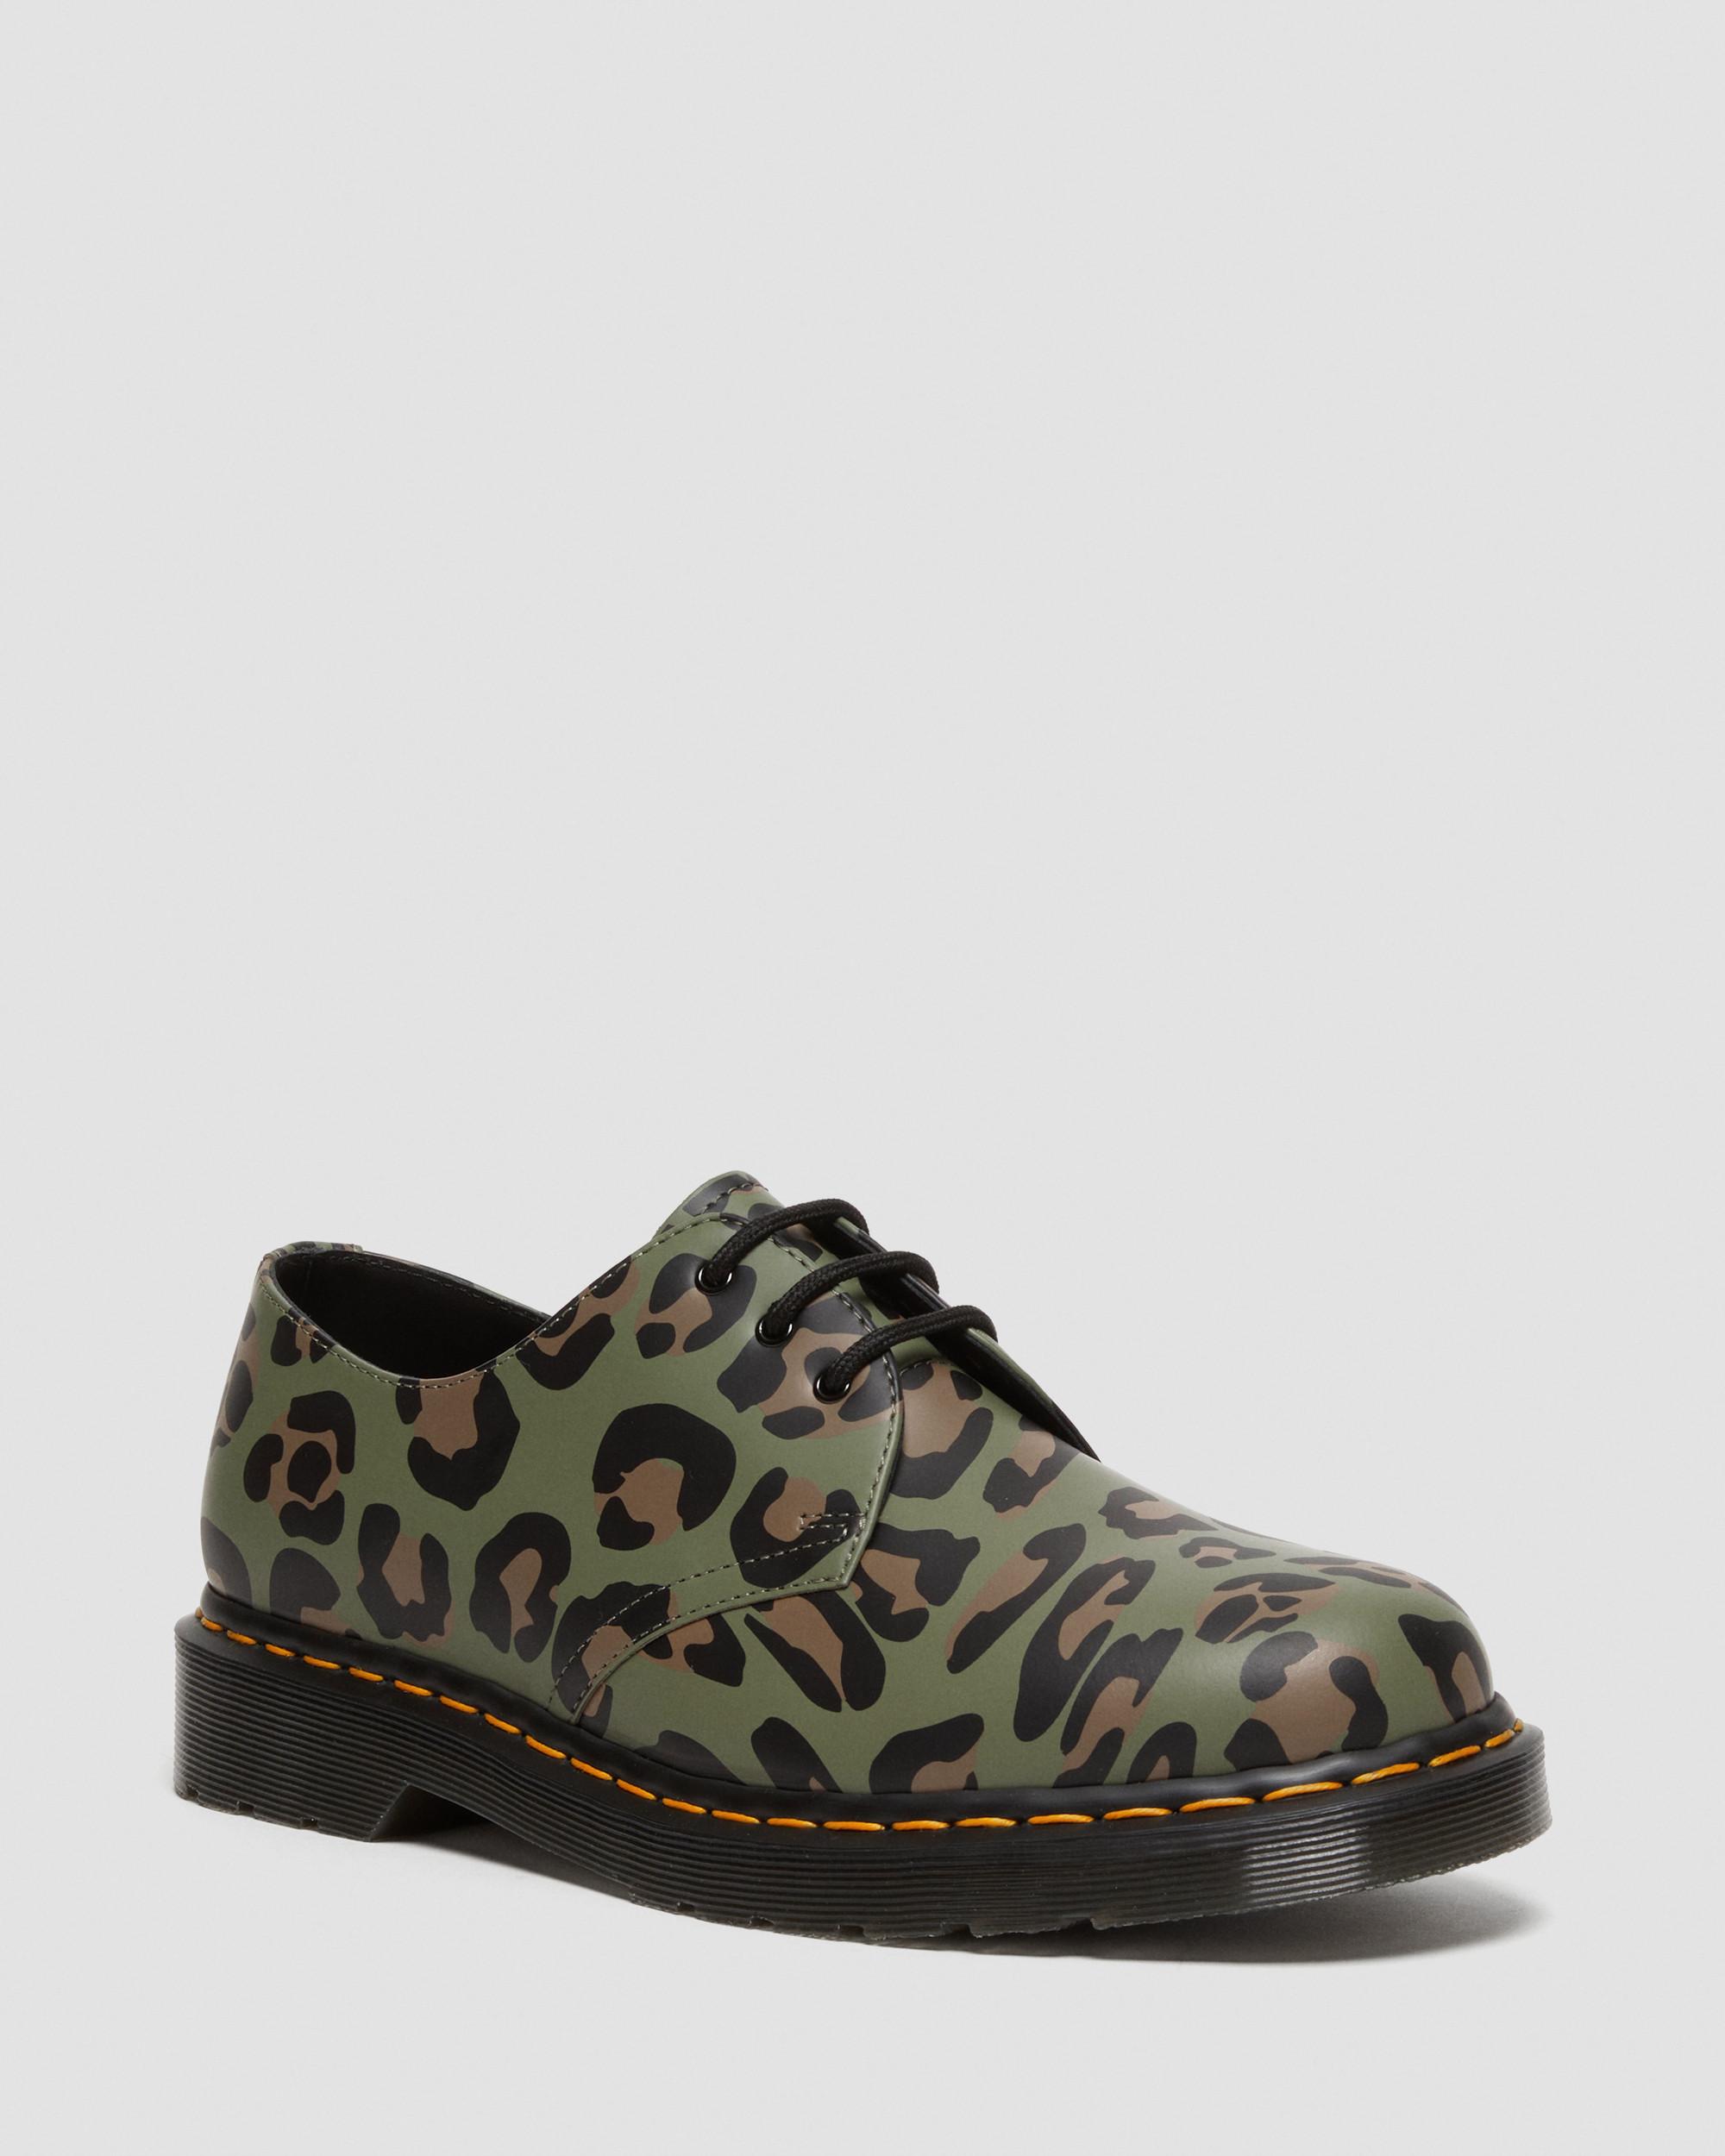 1461 Distorted Leopard Print Oxford Shoes in Khaki Green | Dr. Martens